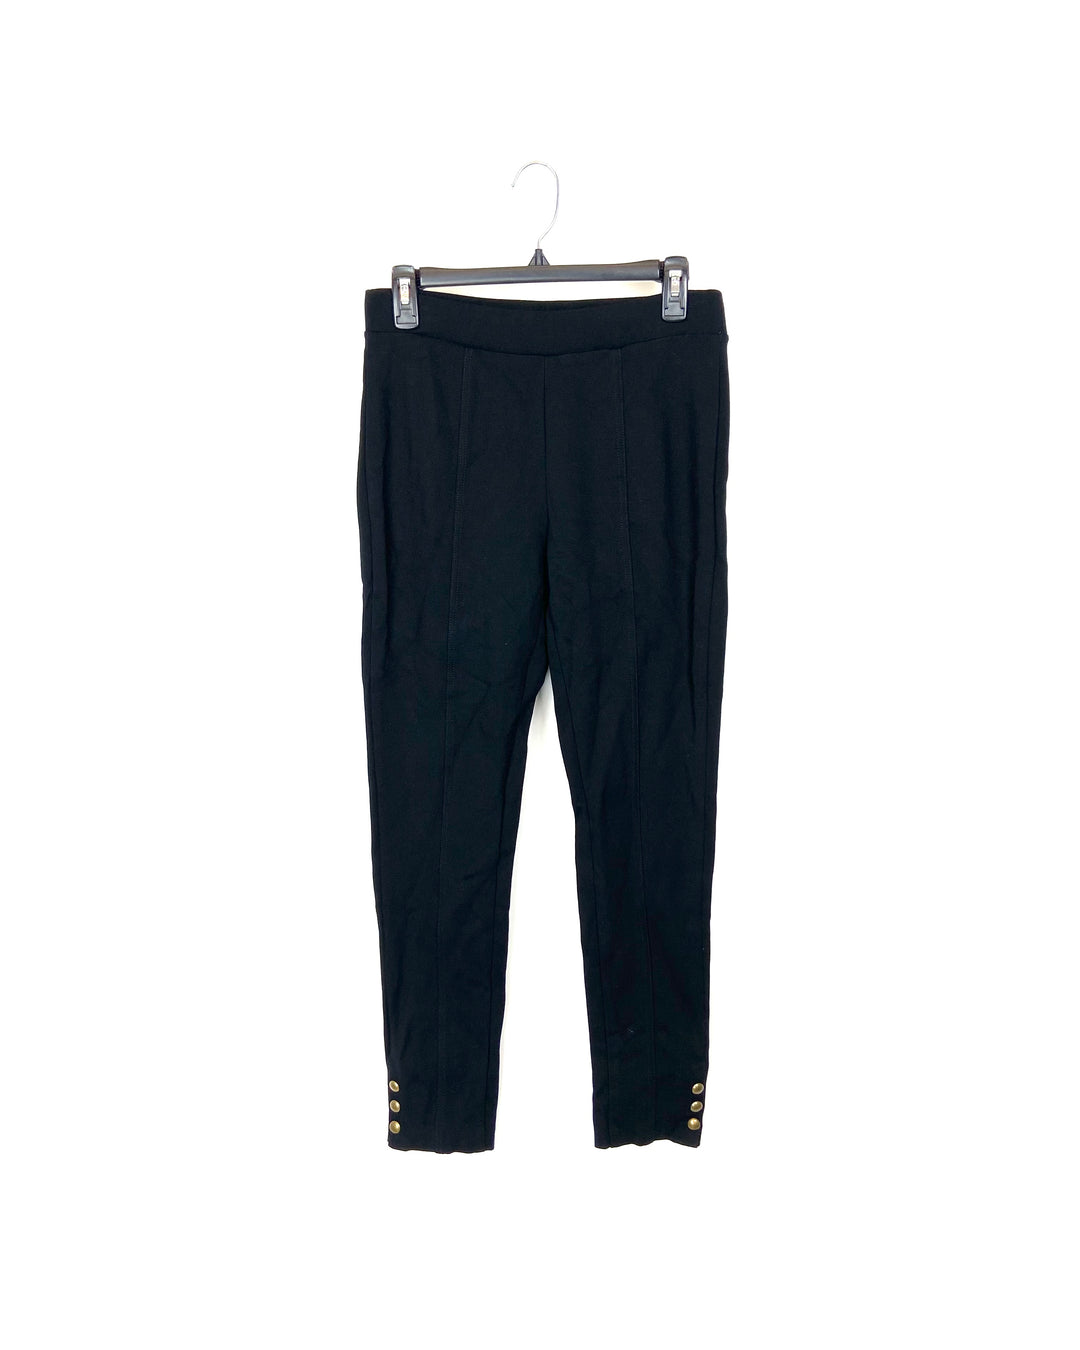 Black Fitted Pants - Small